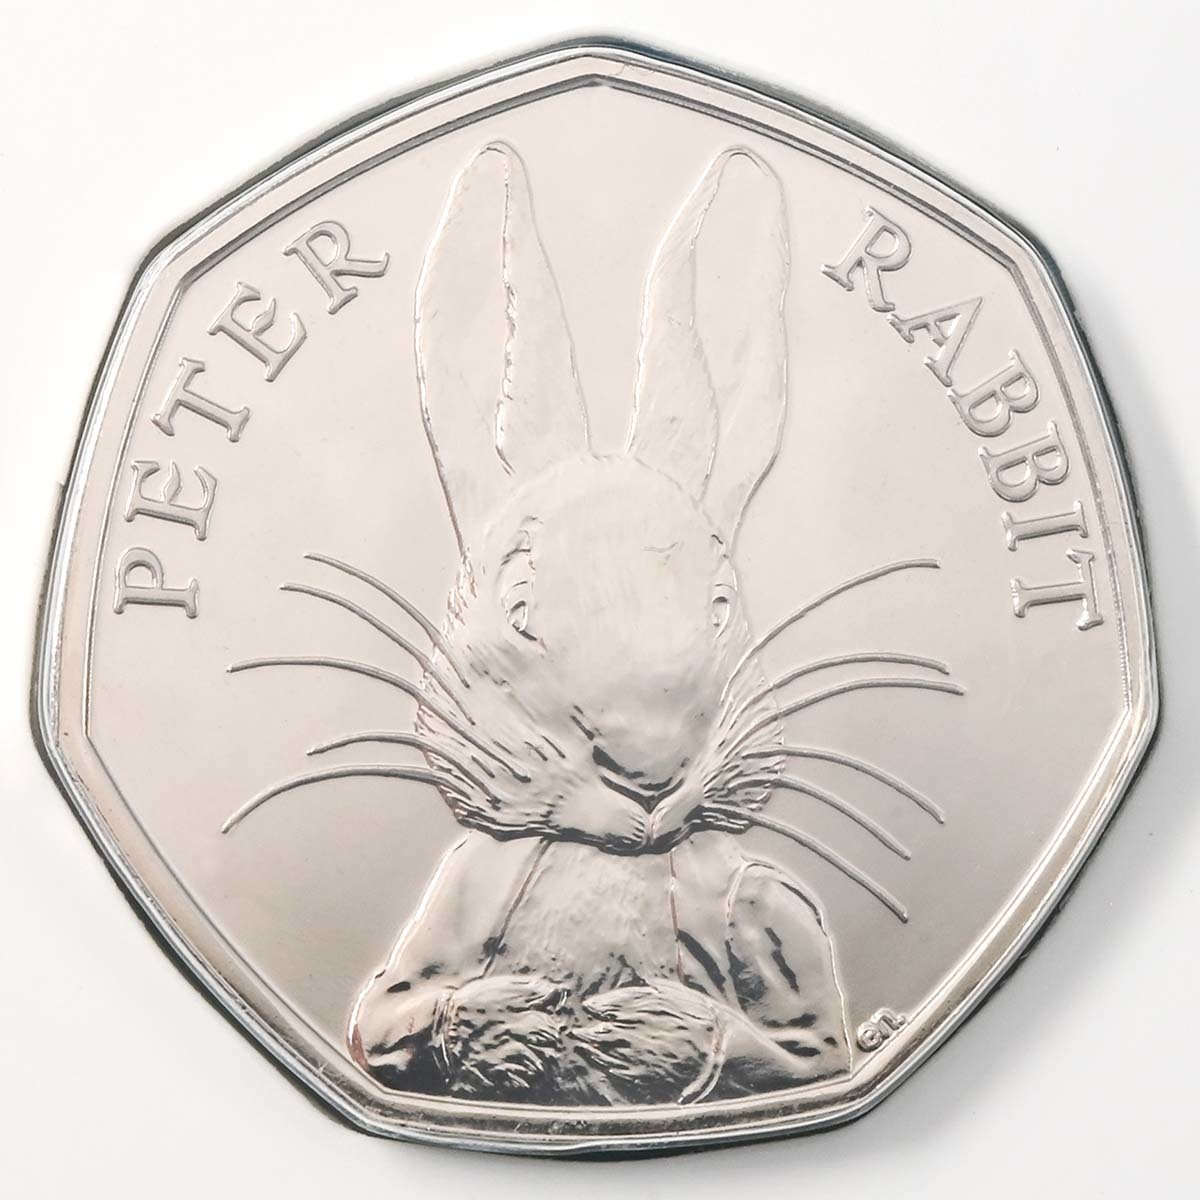 UK16BPRB 2016 Beatrix Potter Peter Rabbit Fifty Pence Brilliant Uncirculated Coin In Folder Reverse